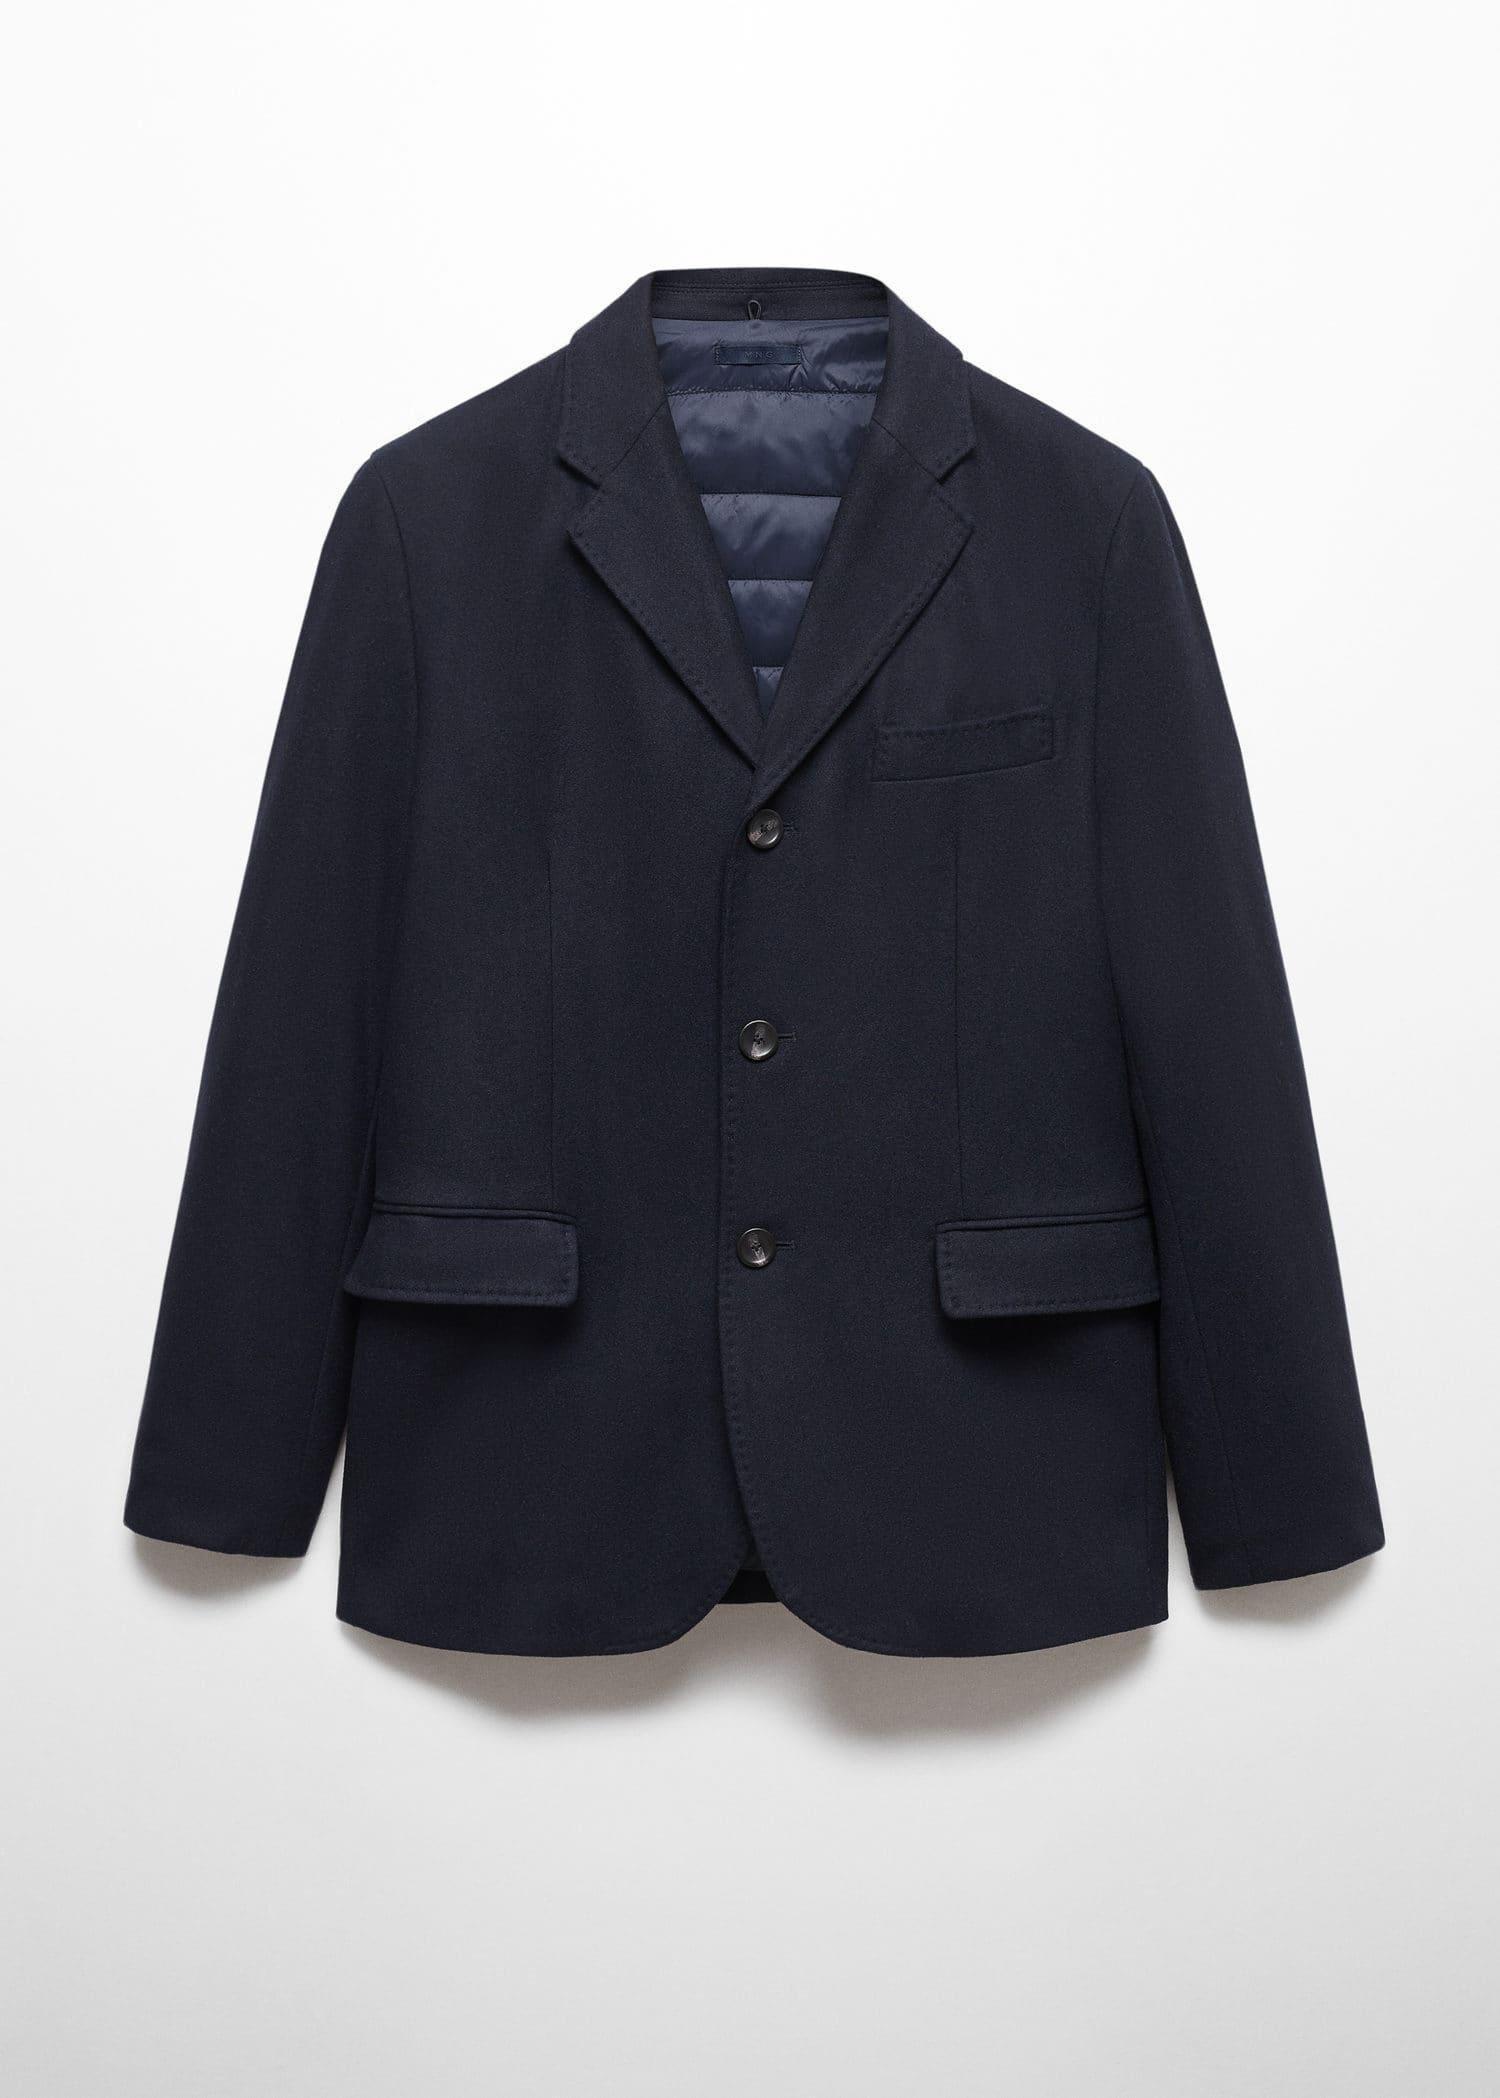 Mango - Navy Quilted Wool Jacket